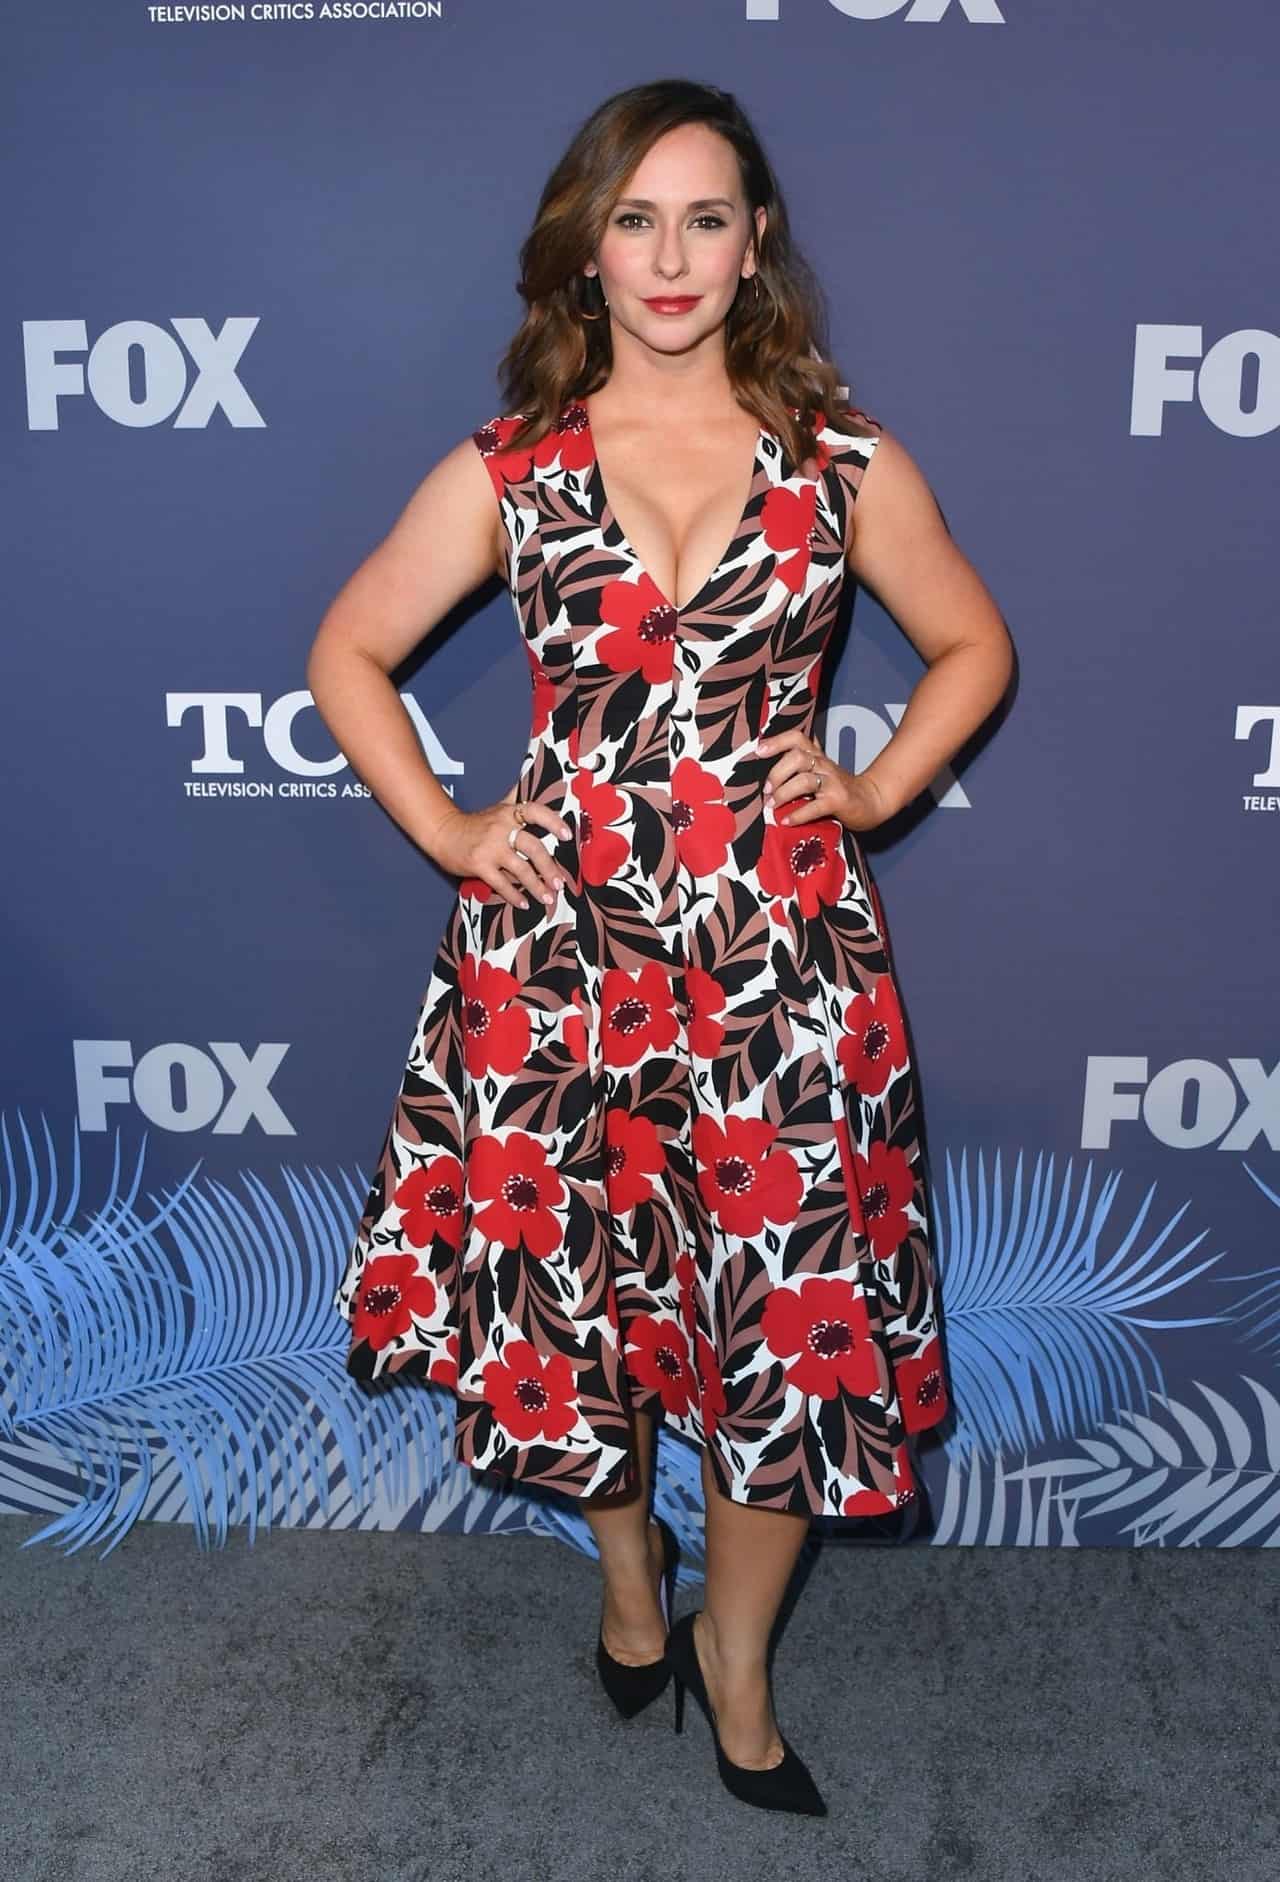 Jennifer Love Hewitt in Floral Dress at the FOX Summer TCA All-Star Party